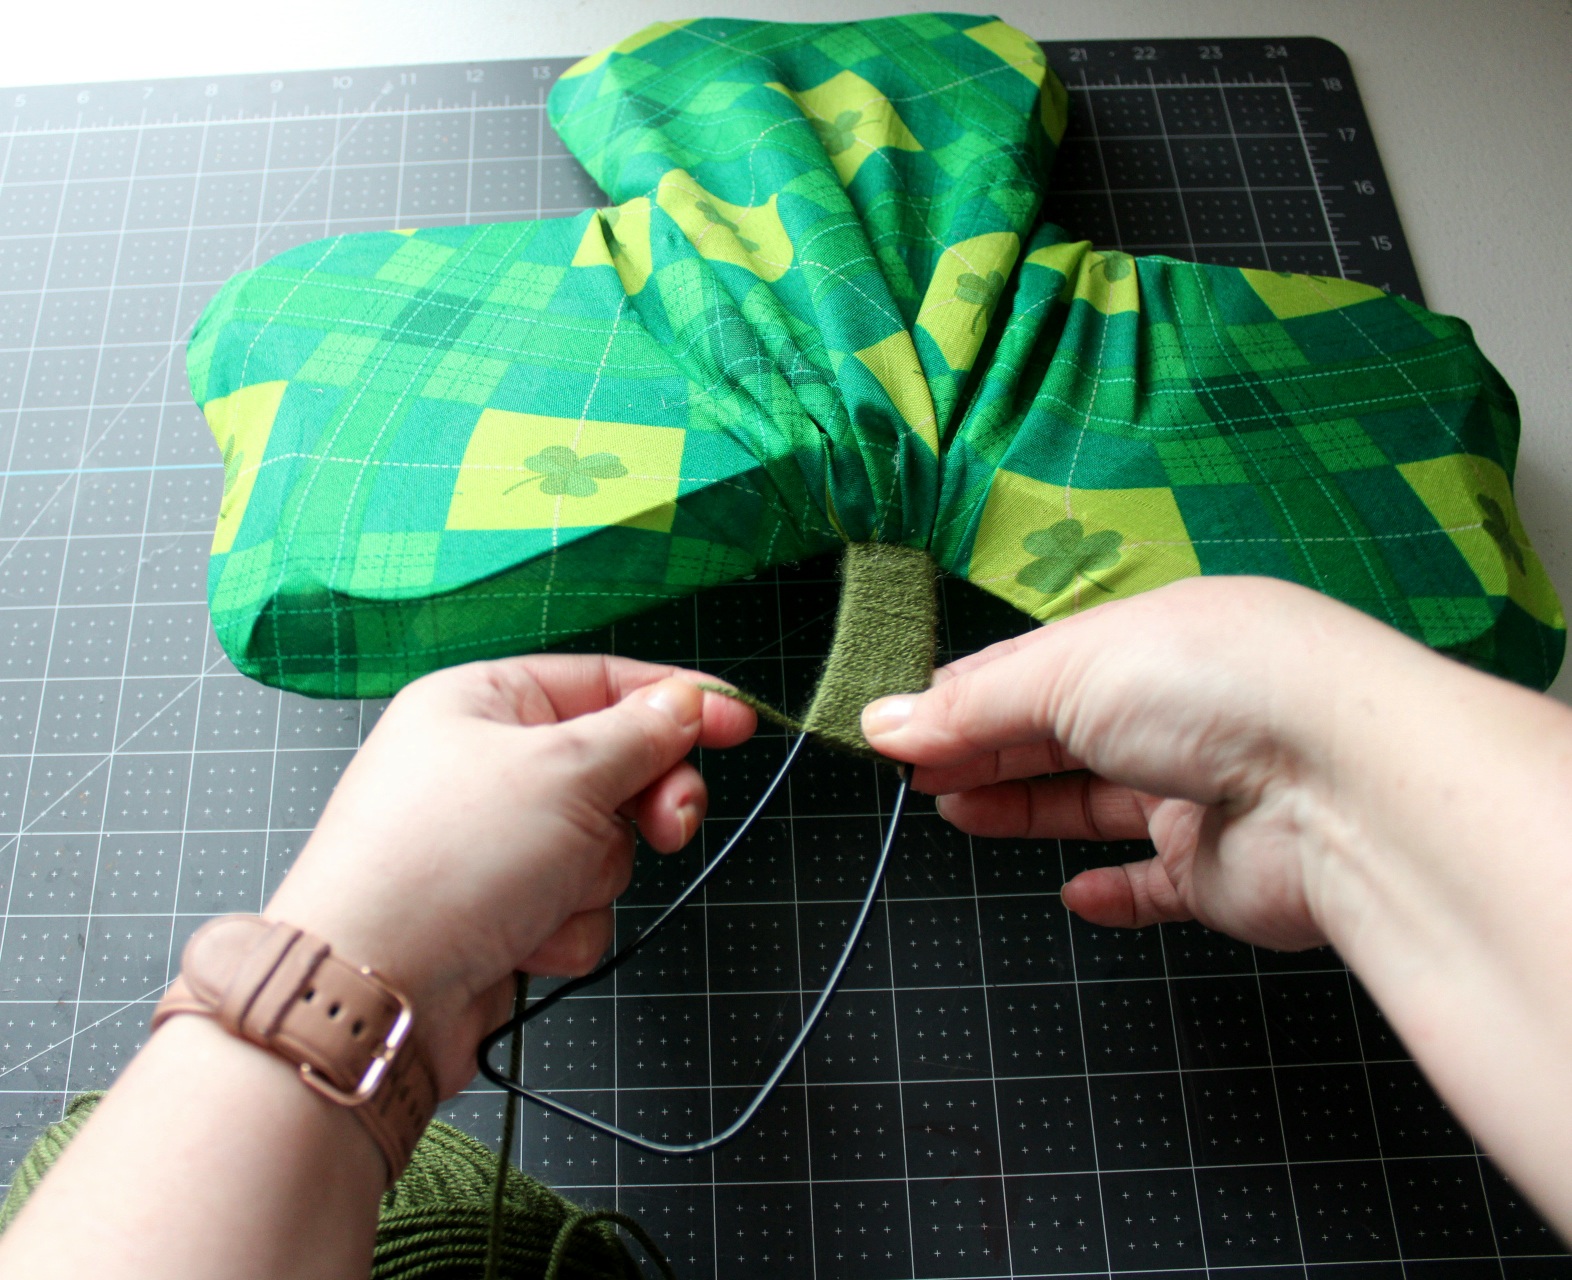 Wrapping moss green yarn around the stem of the DIY shamrock wreath form.